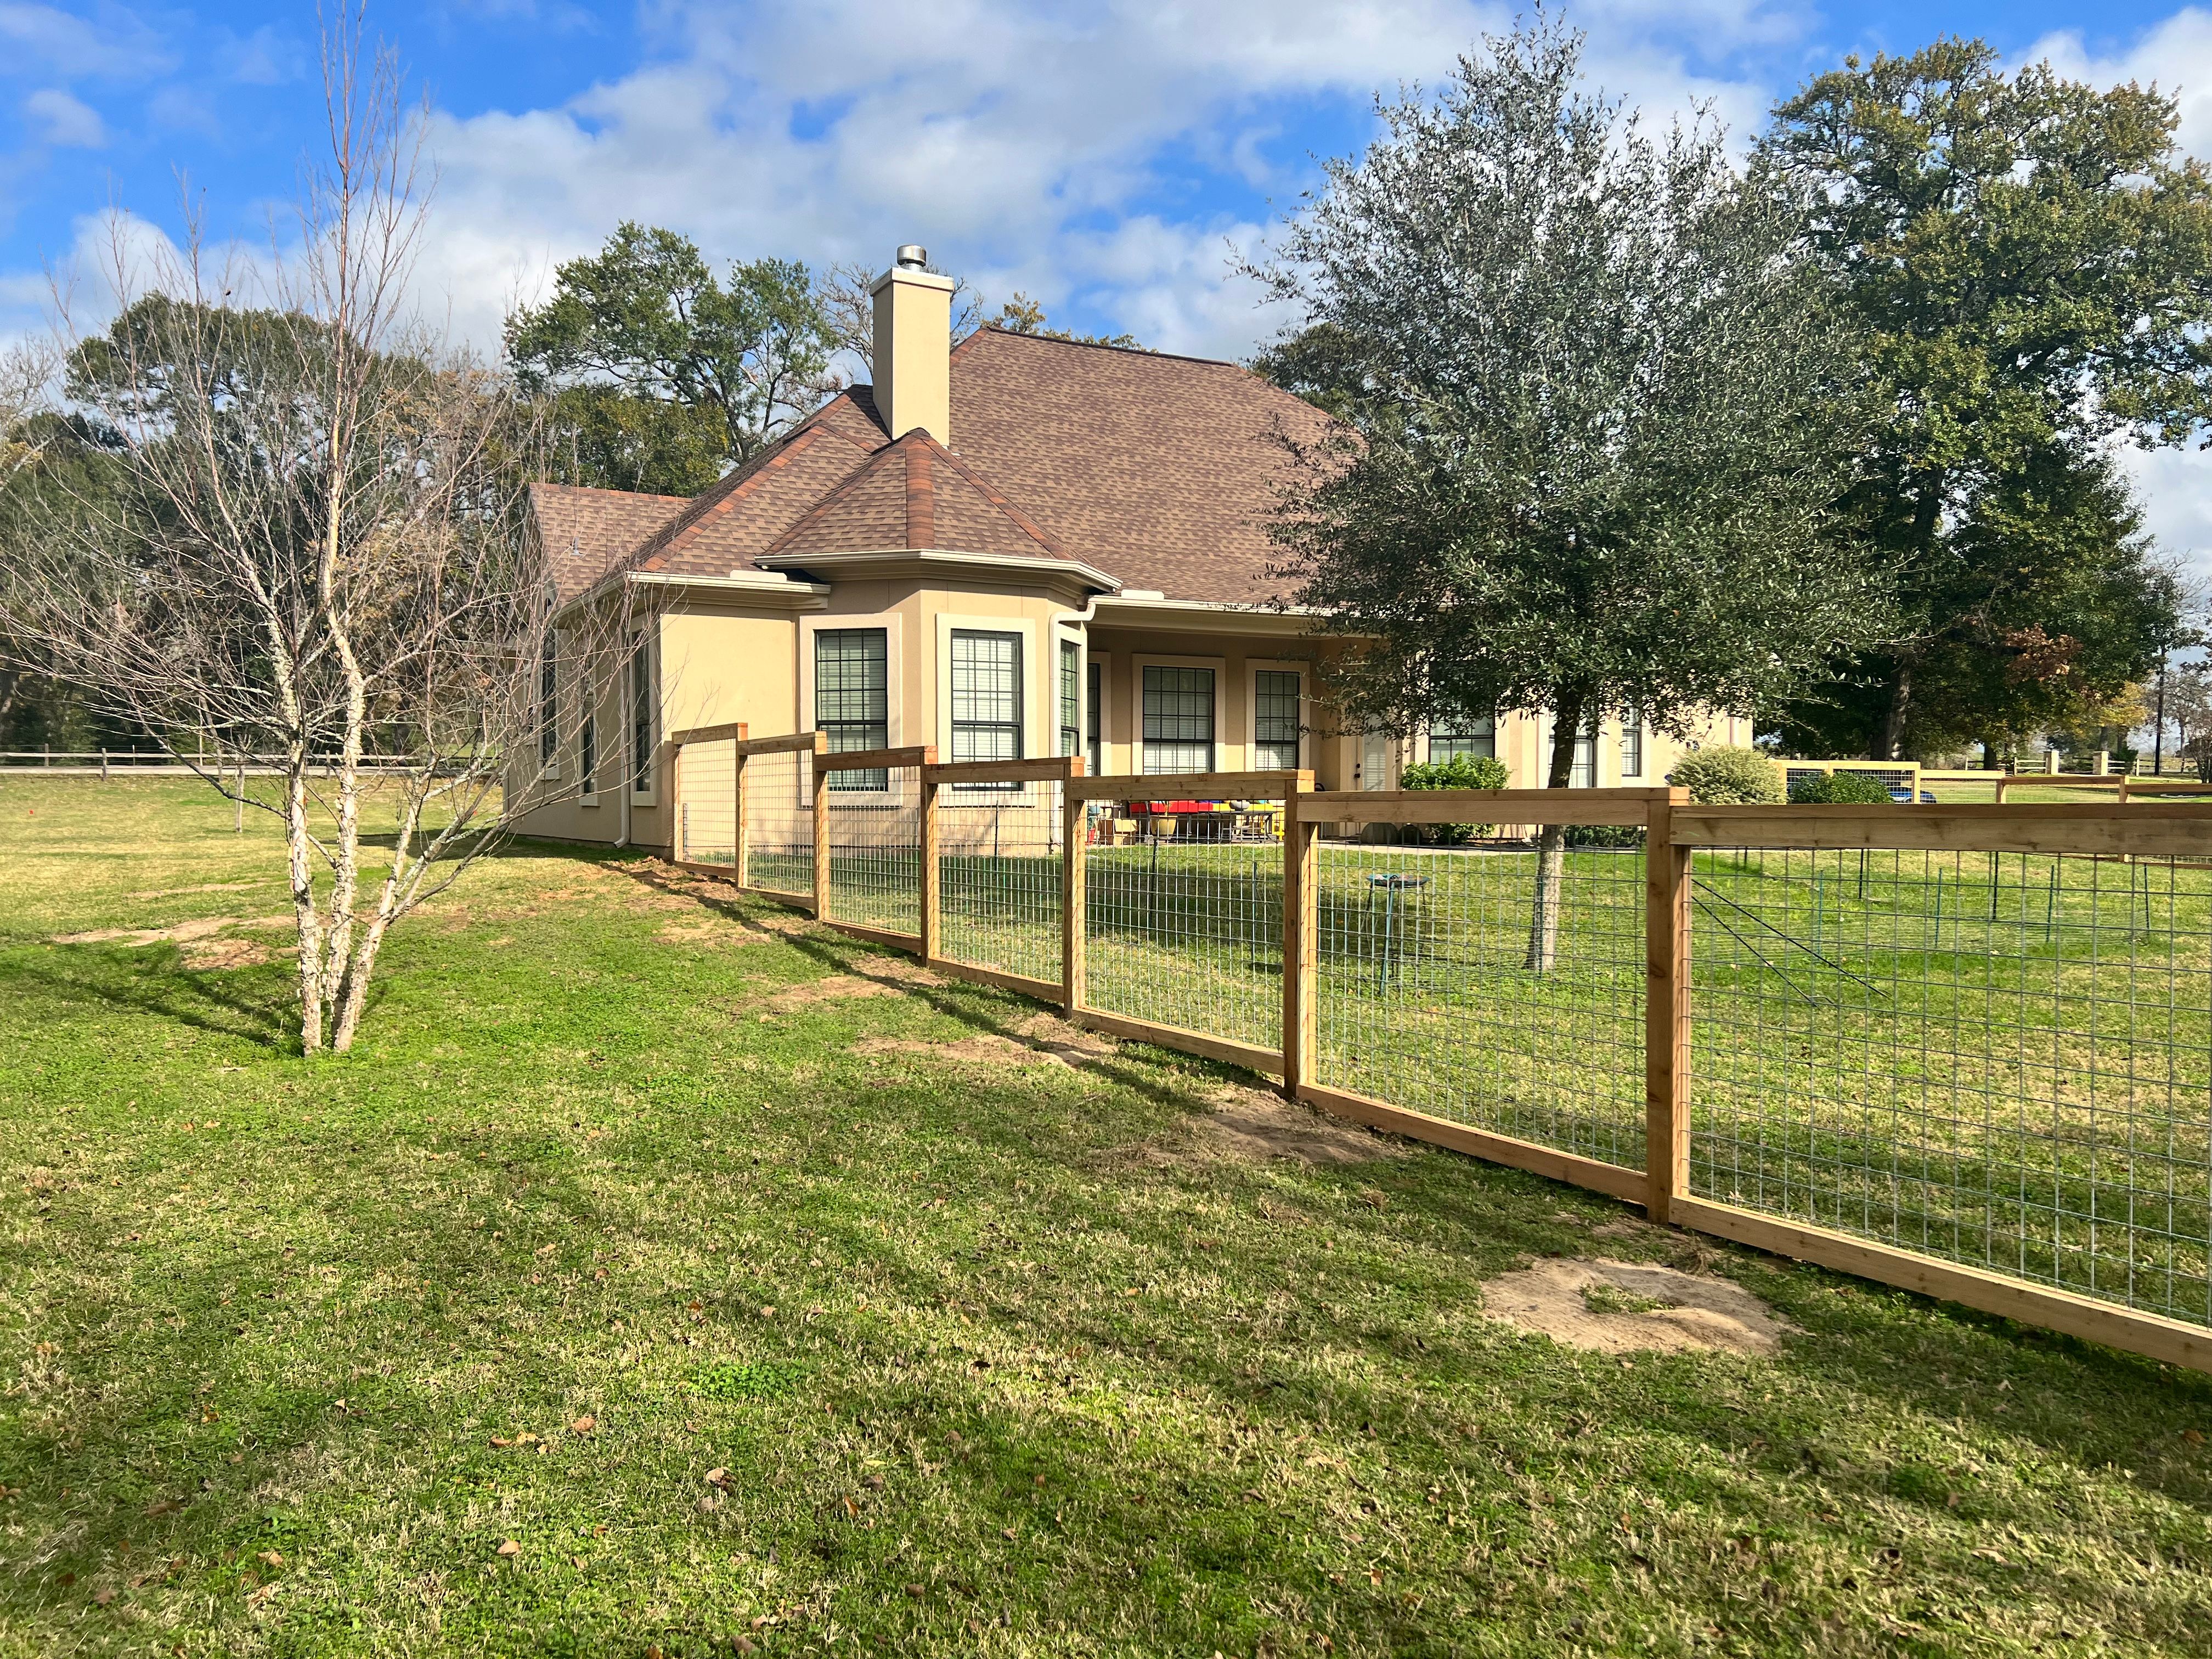 Decorative Wood Fencing  for Pride Of Texas Fence Company in Brookshire, TX